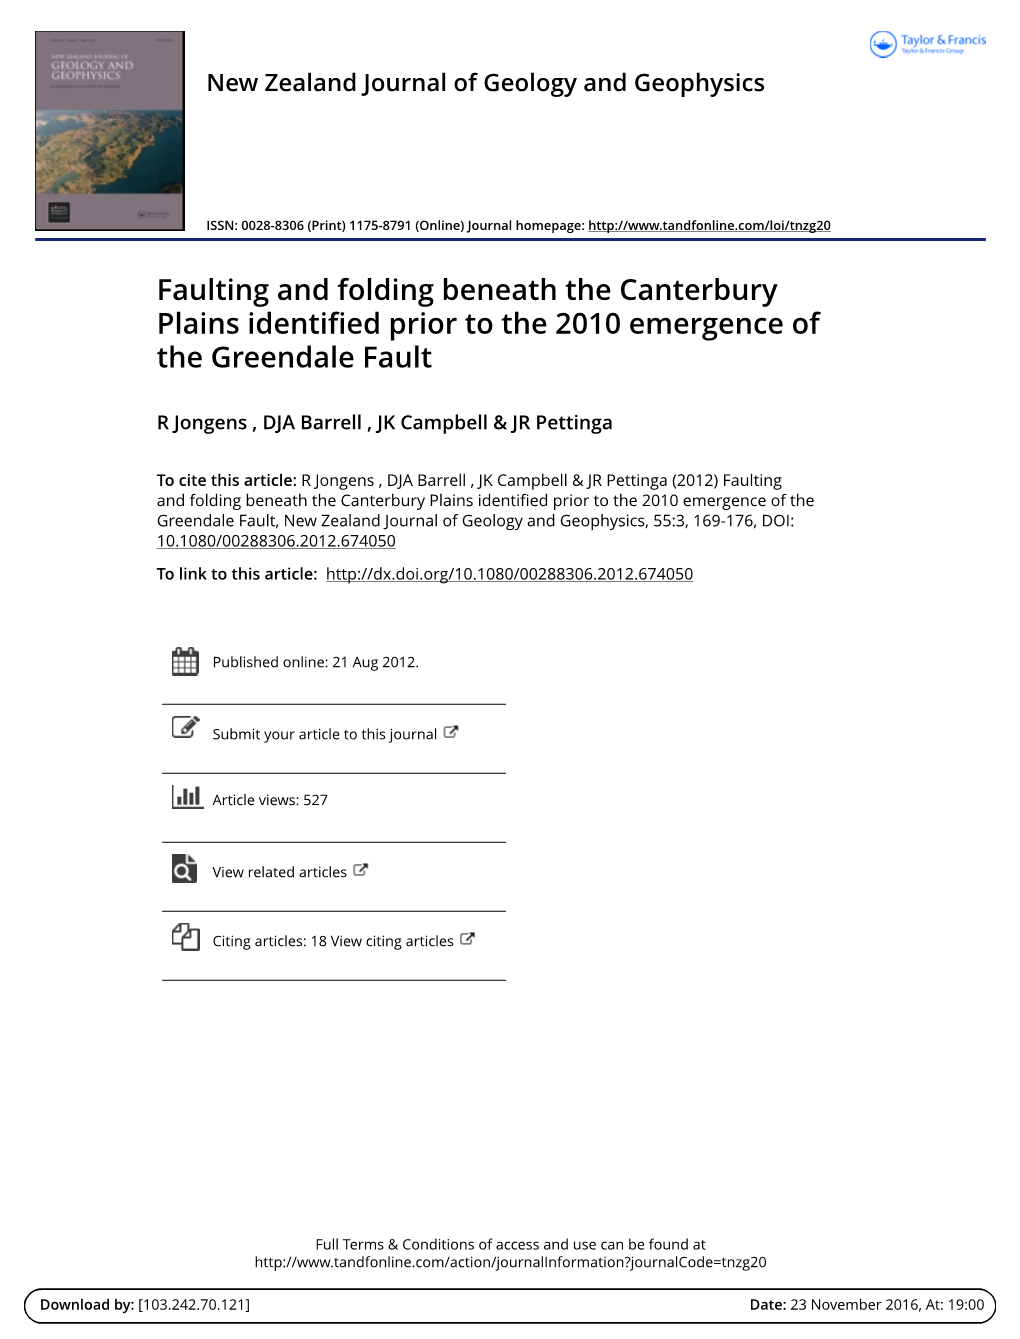 Faulting and Folding Beneath the Canterbury Plains Identified Prior to the 2010 Emergence of the Greendale Fault